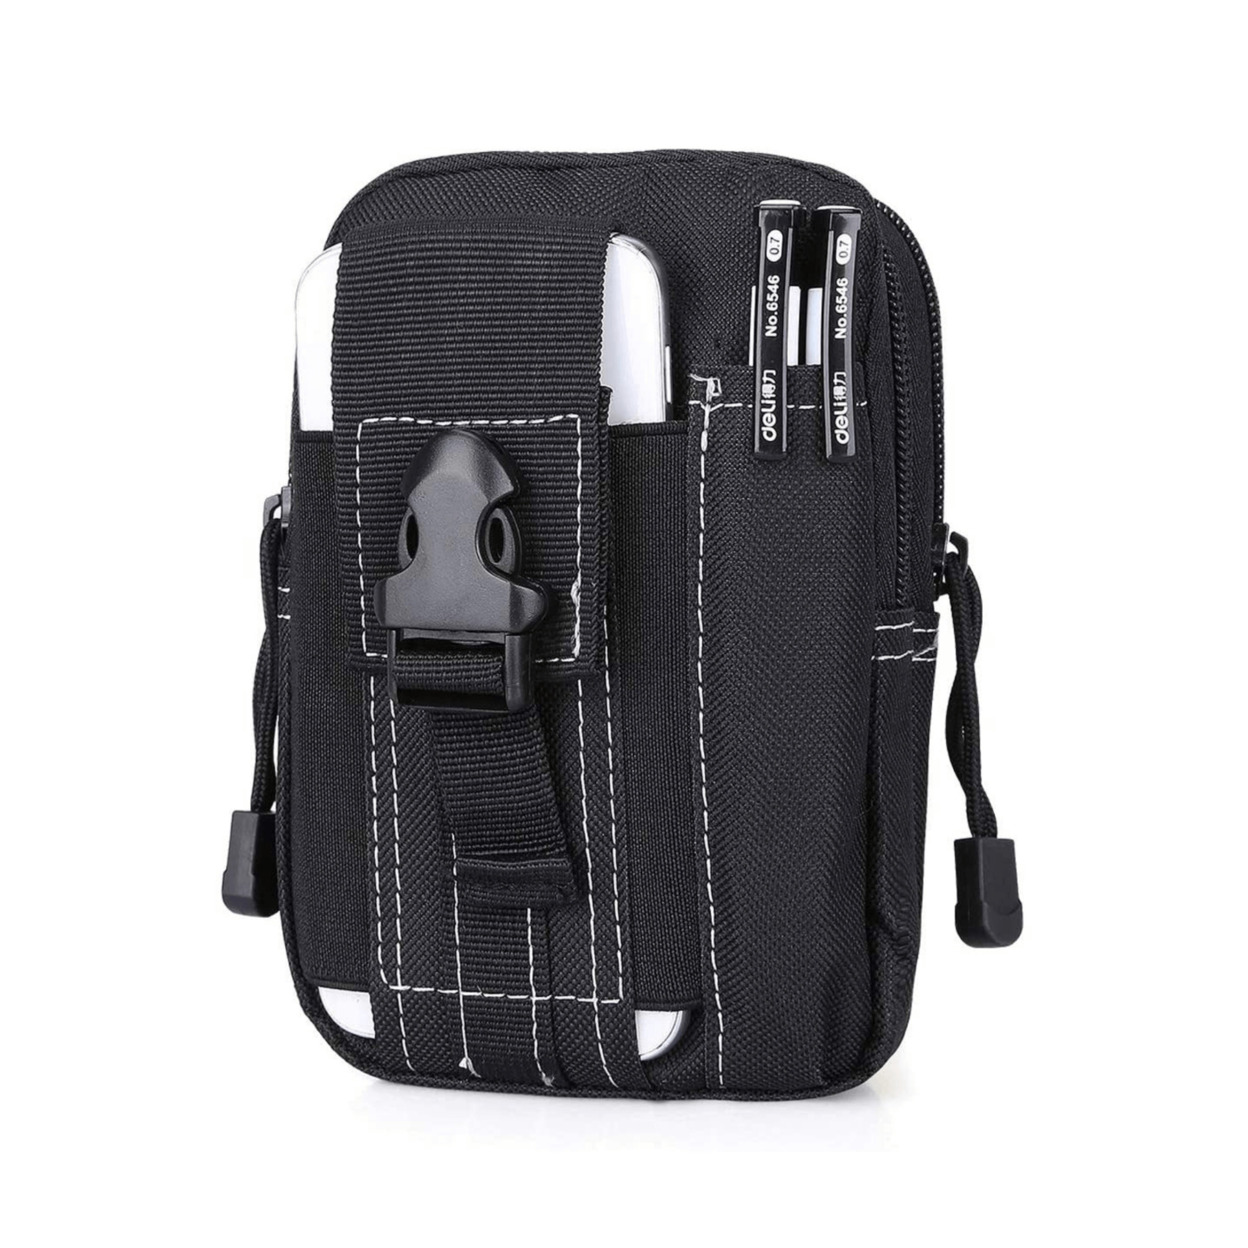 Tactical MOLLE Pouch & Waist Bag For Hiking & Outdoor Activities - Black/White